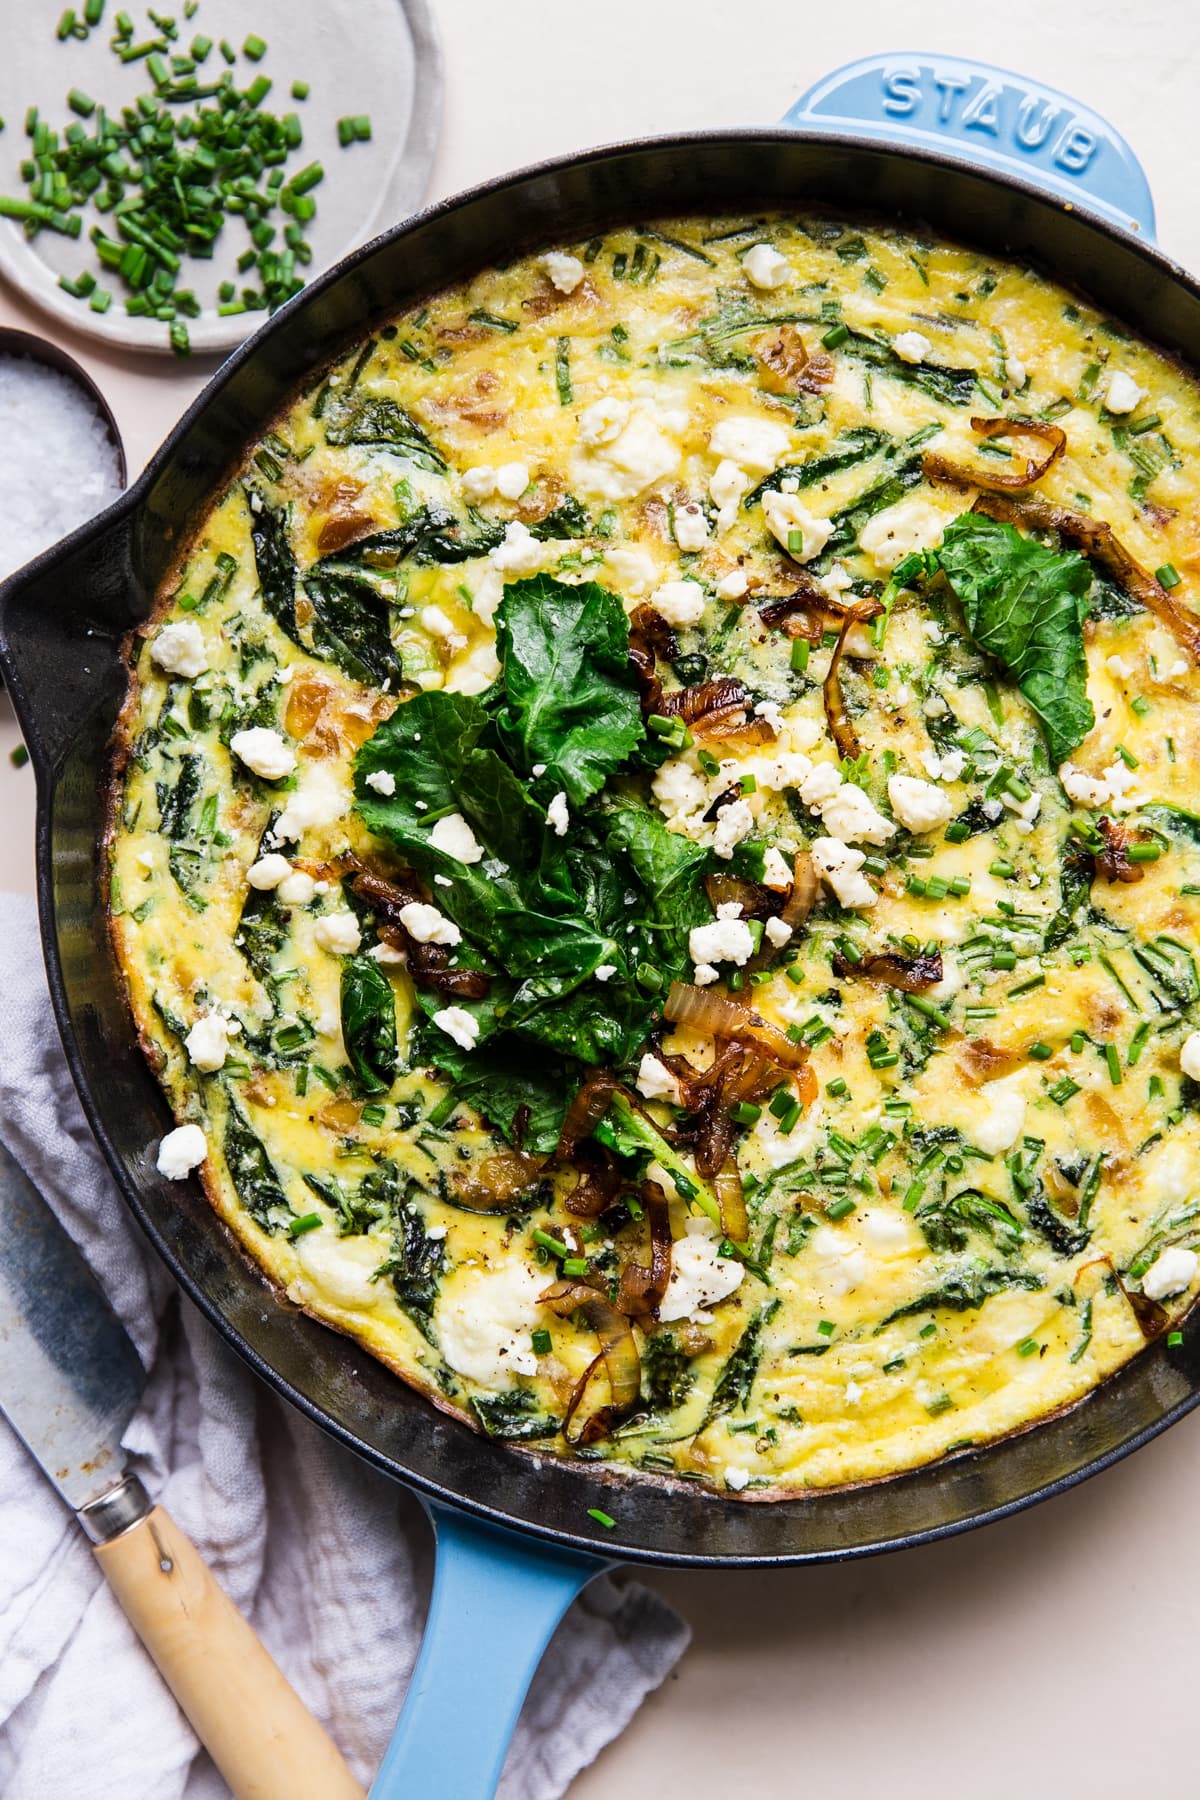 Caramelized Onion Frittata with bacon and kale